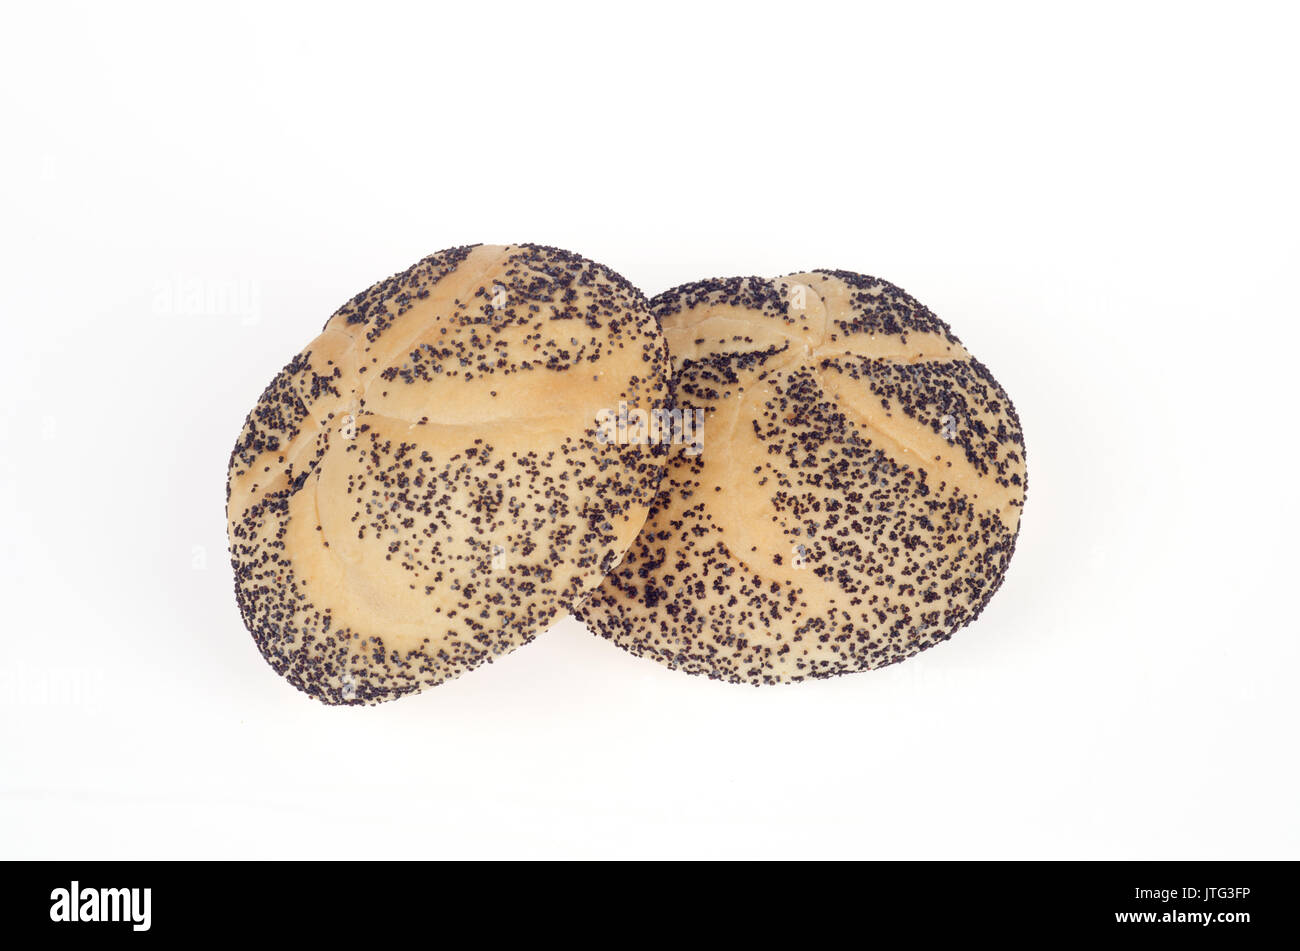 Poppy seed kaiser rolls on white background cut-out. Stock Photo